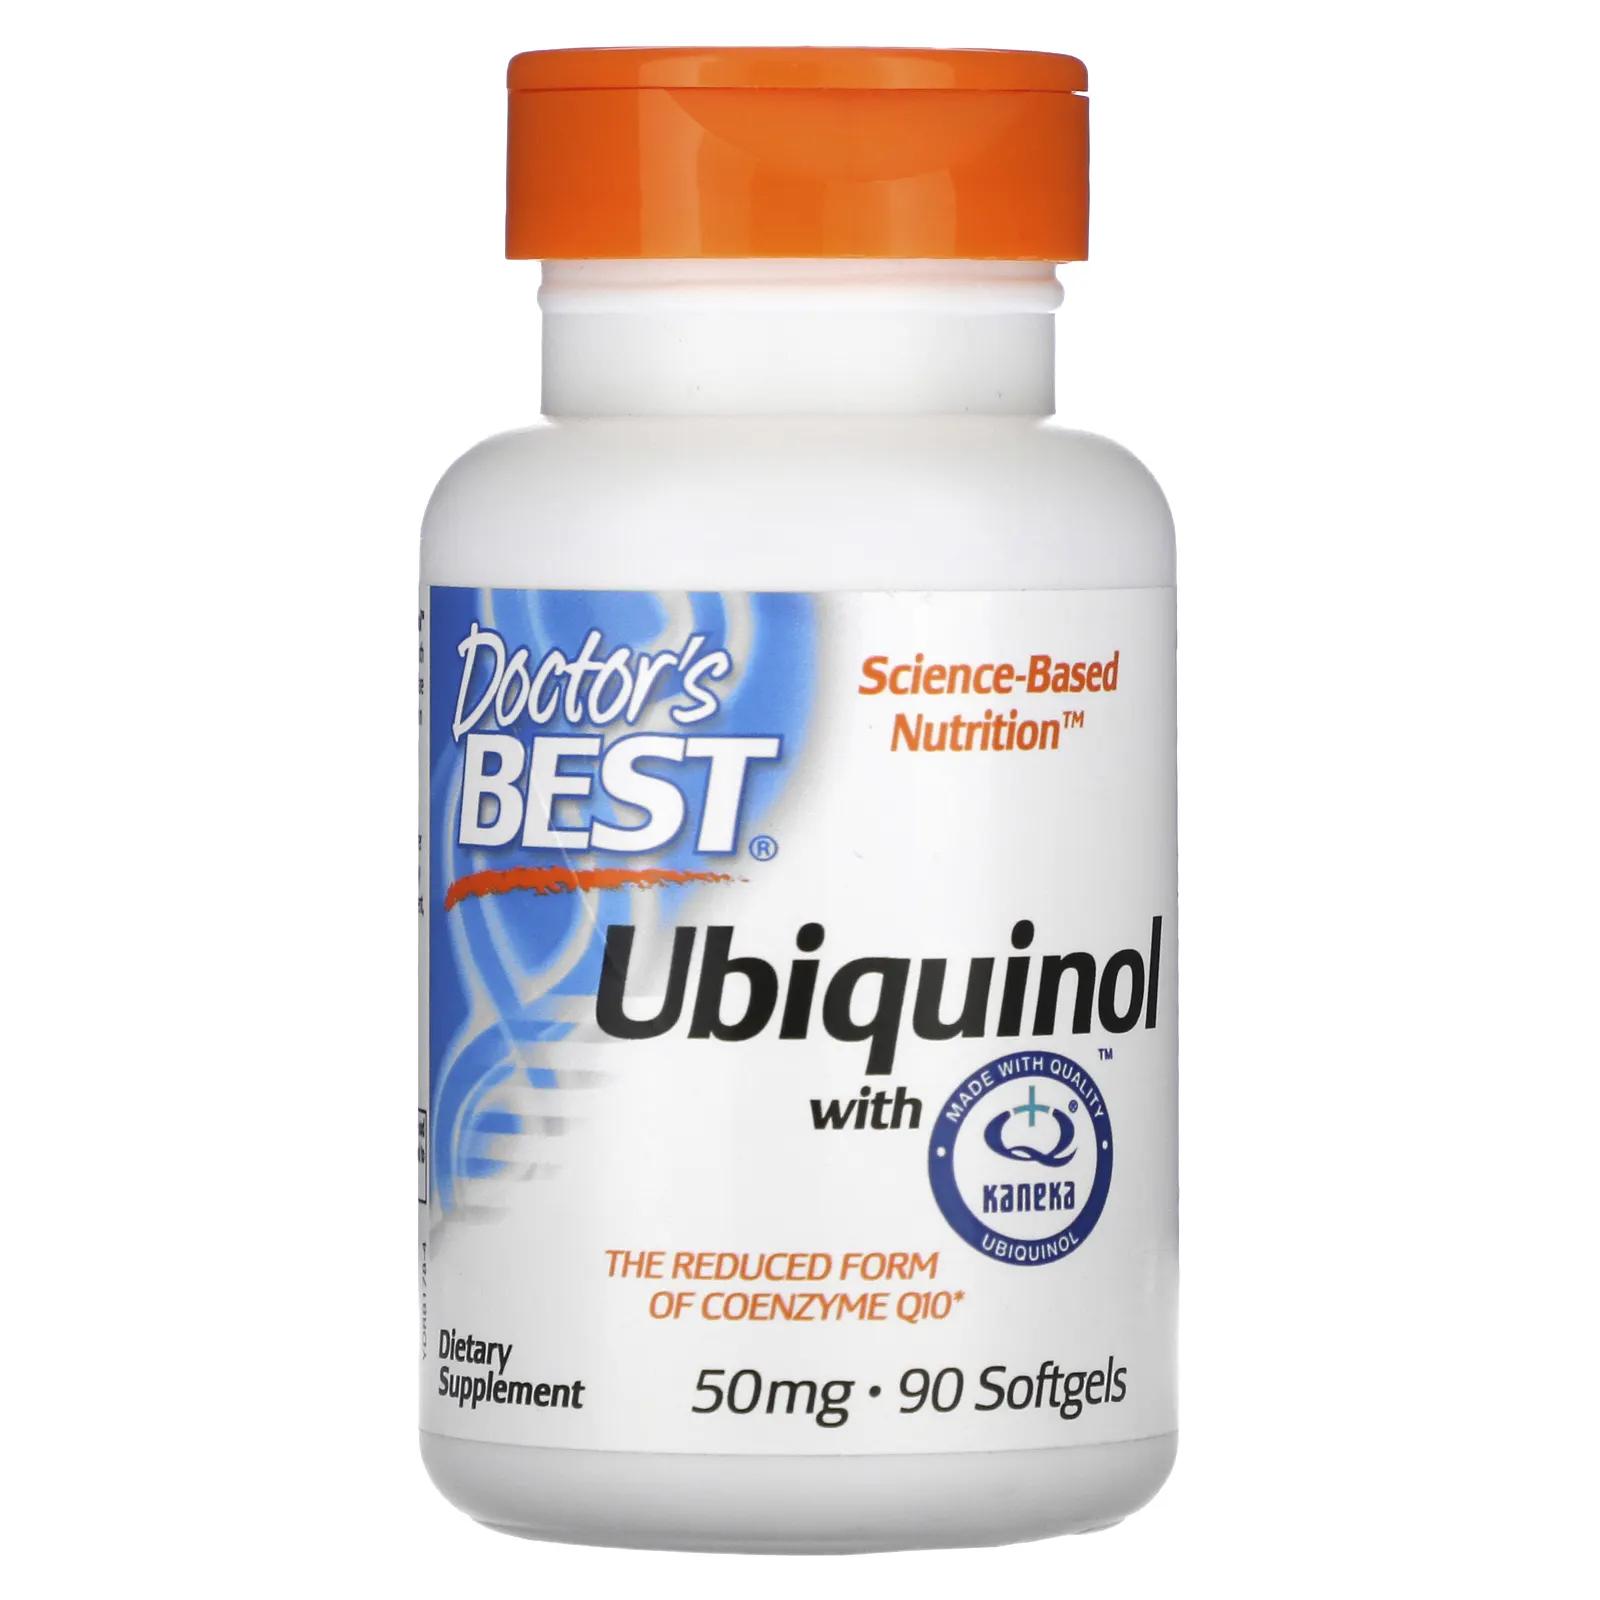 life extension super ubiquinol coq10 with enhanced mitochondrial support 100 mg 60 softgels Doctor's Best Ubiquinol with Kaneka 50 mg 90 Softgels